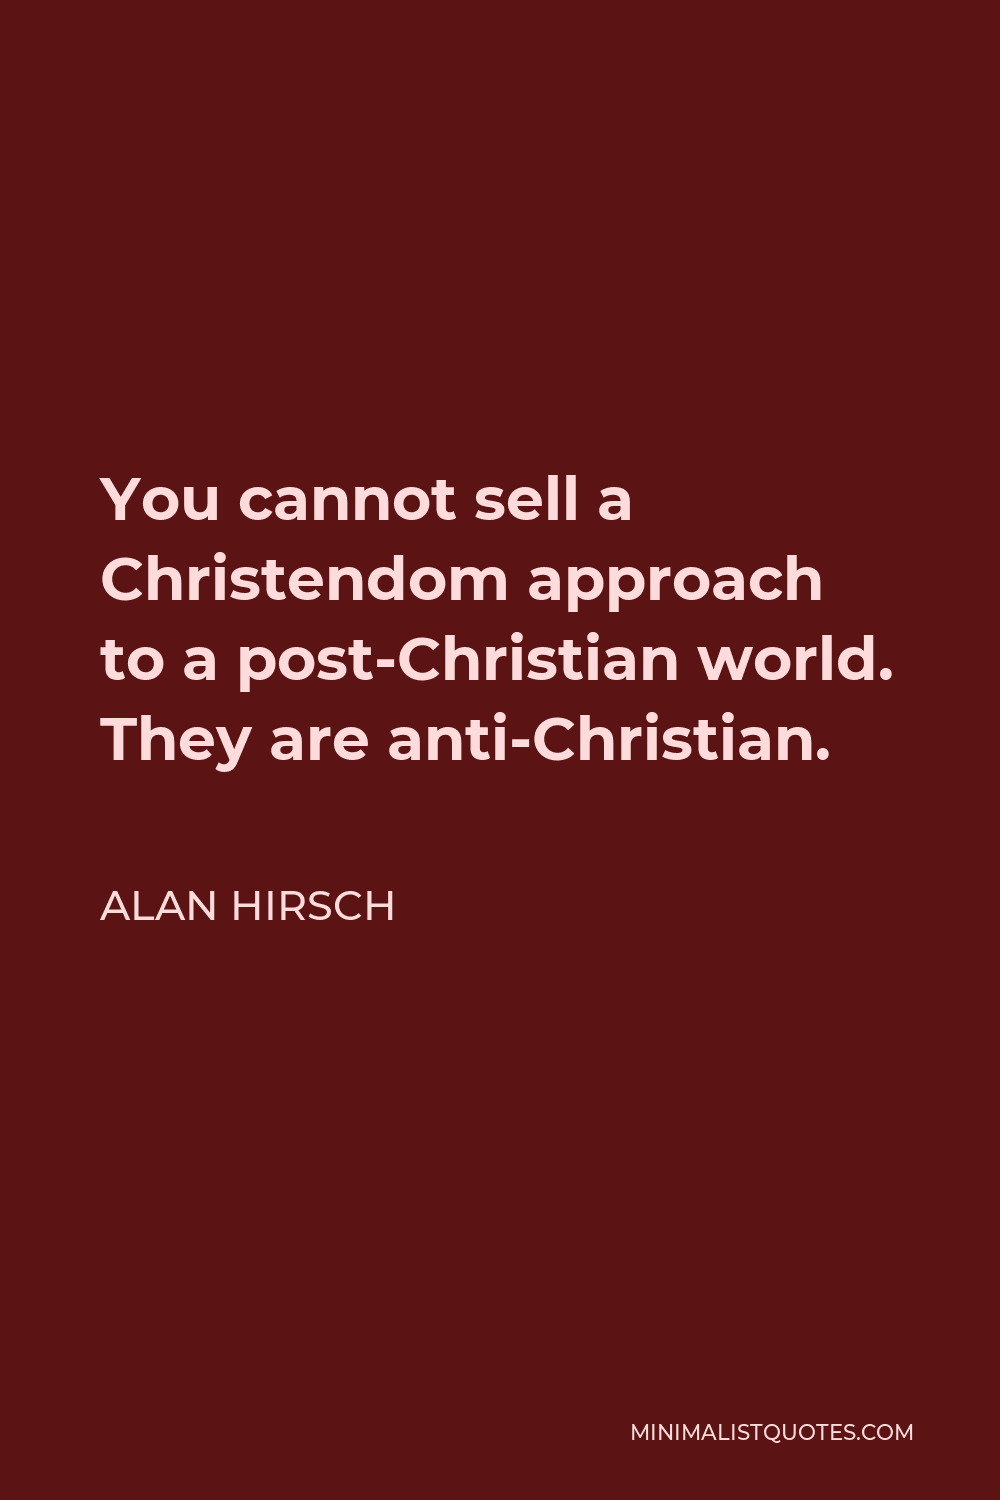 Alan Hirsch Quote - You cannot sell a Christendom approach to a post-Christian world. They are anti-Christian.